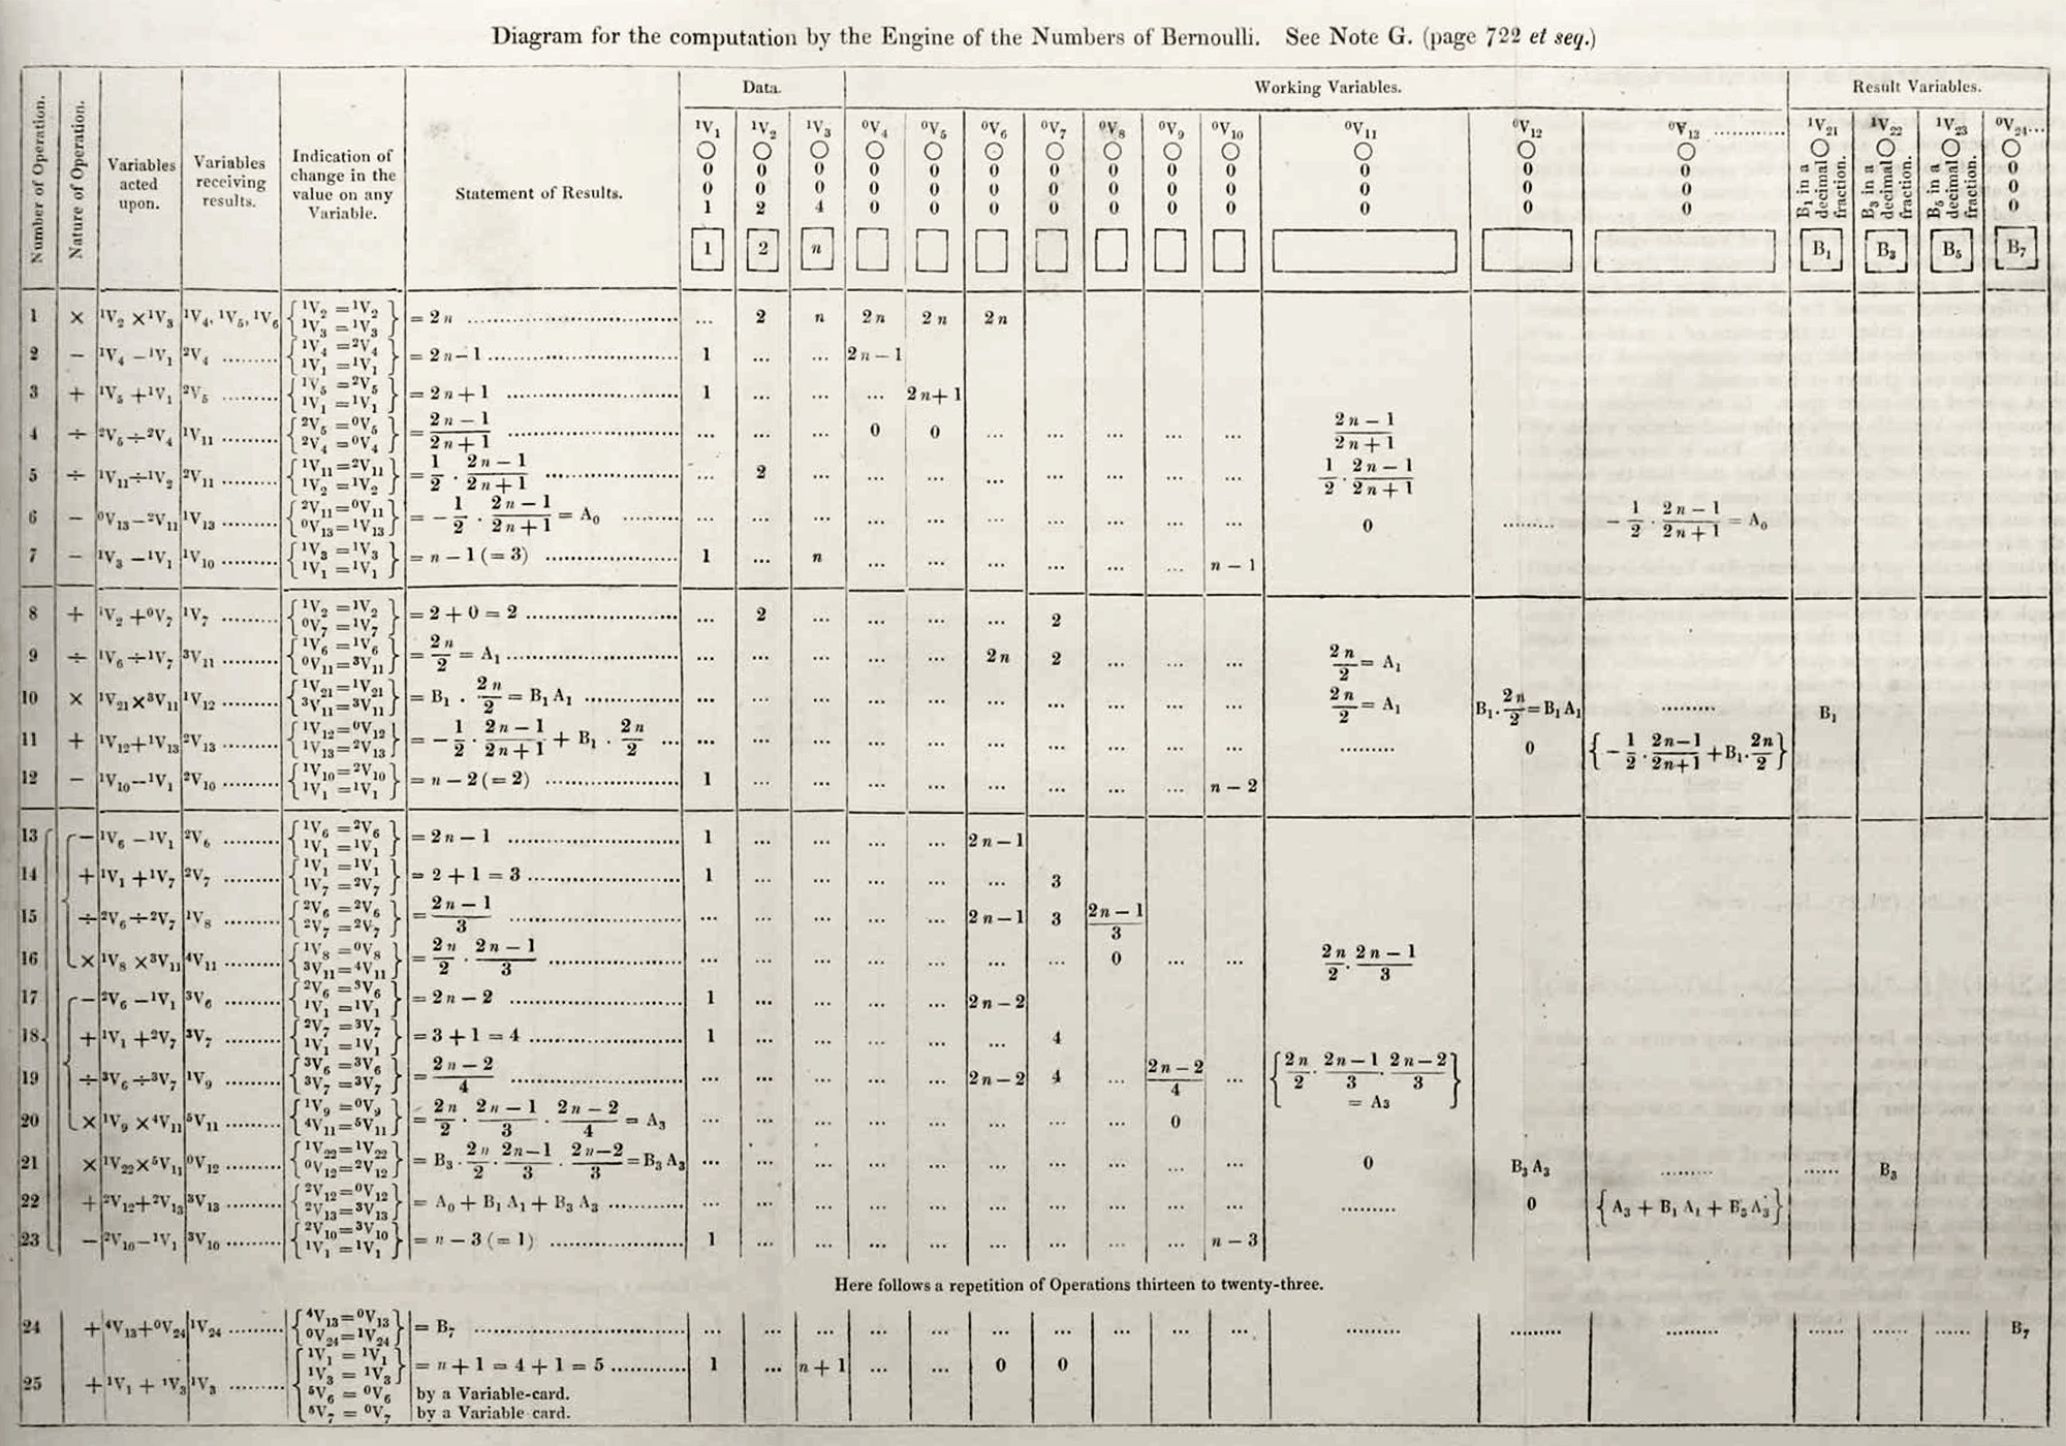 Diagram of an algorithm for the Analytical Engine for the computation of Bernoulli numbers, from Sketch of The Analytical Engine Invented by Charles Babbage by Luigi Menabrea with notes by Ada Lovelace